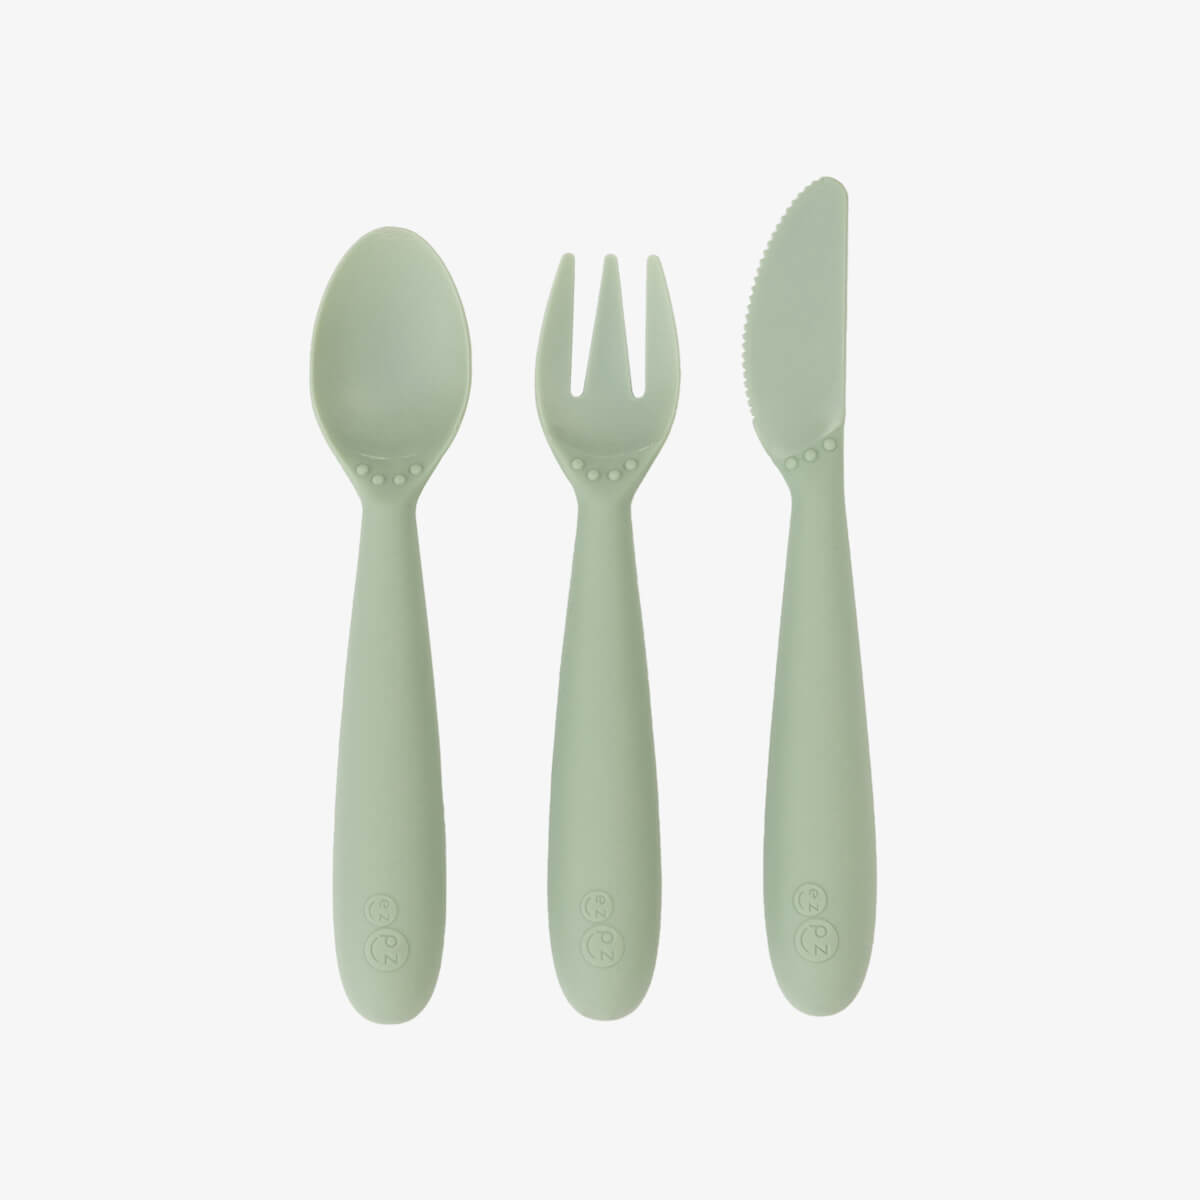 Happy Utensils in Sage by ezpz / Silicone Spoon, Fork and Knife Set for Kids